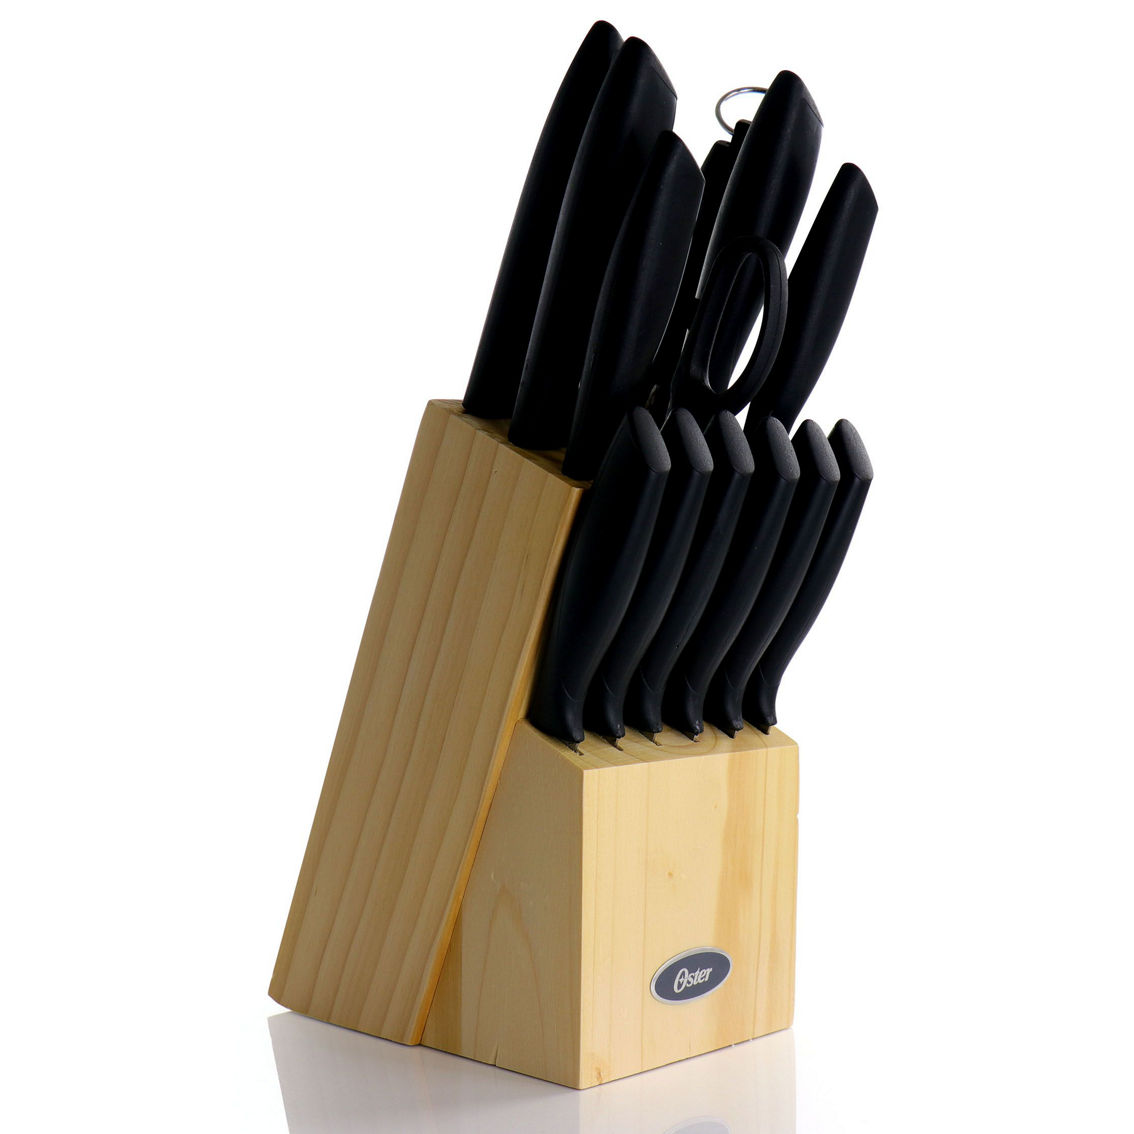 Gibson Home Westminster 23 Piece Carbon Stainless Steel Cutlery Set in Black wit - Image 2 of 5